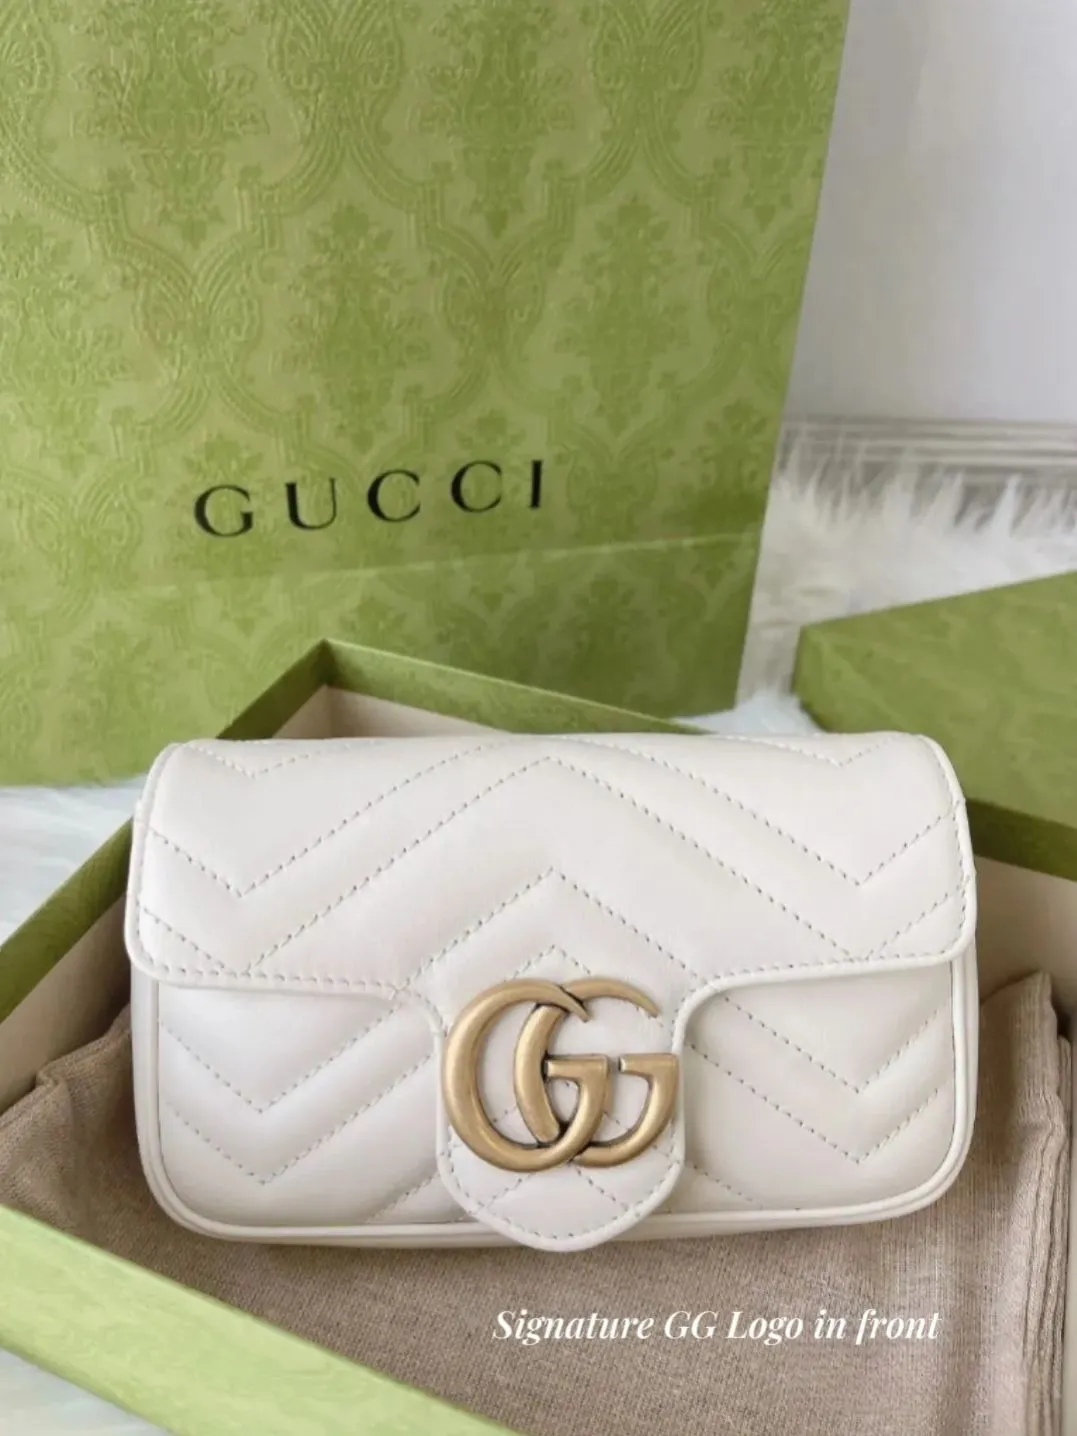 GUCCI MARMONT SUPER MINI - Styling + Review 